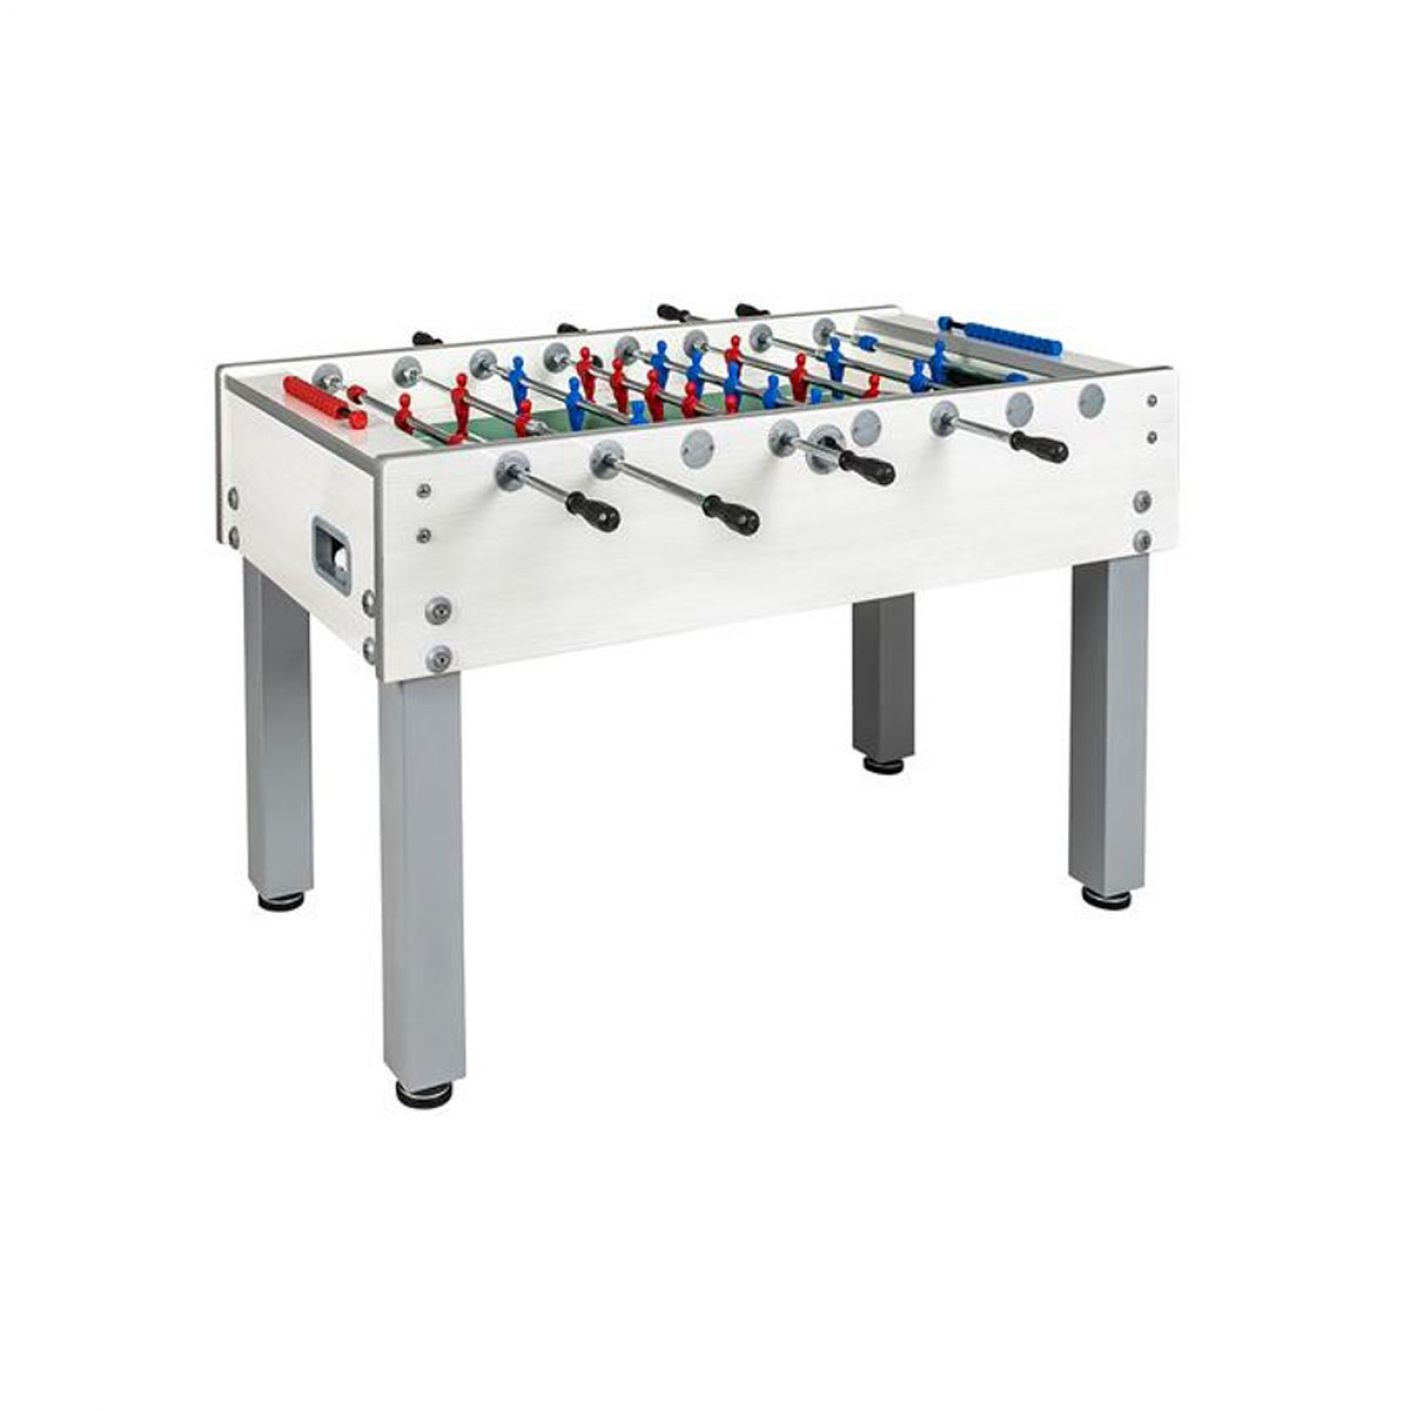 Garlando Football Table G-500 Weatherproof white with outgoing temples